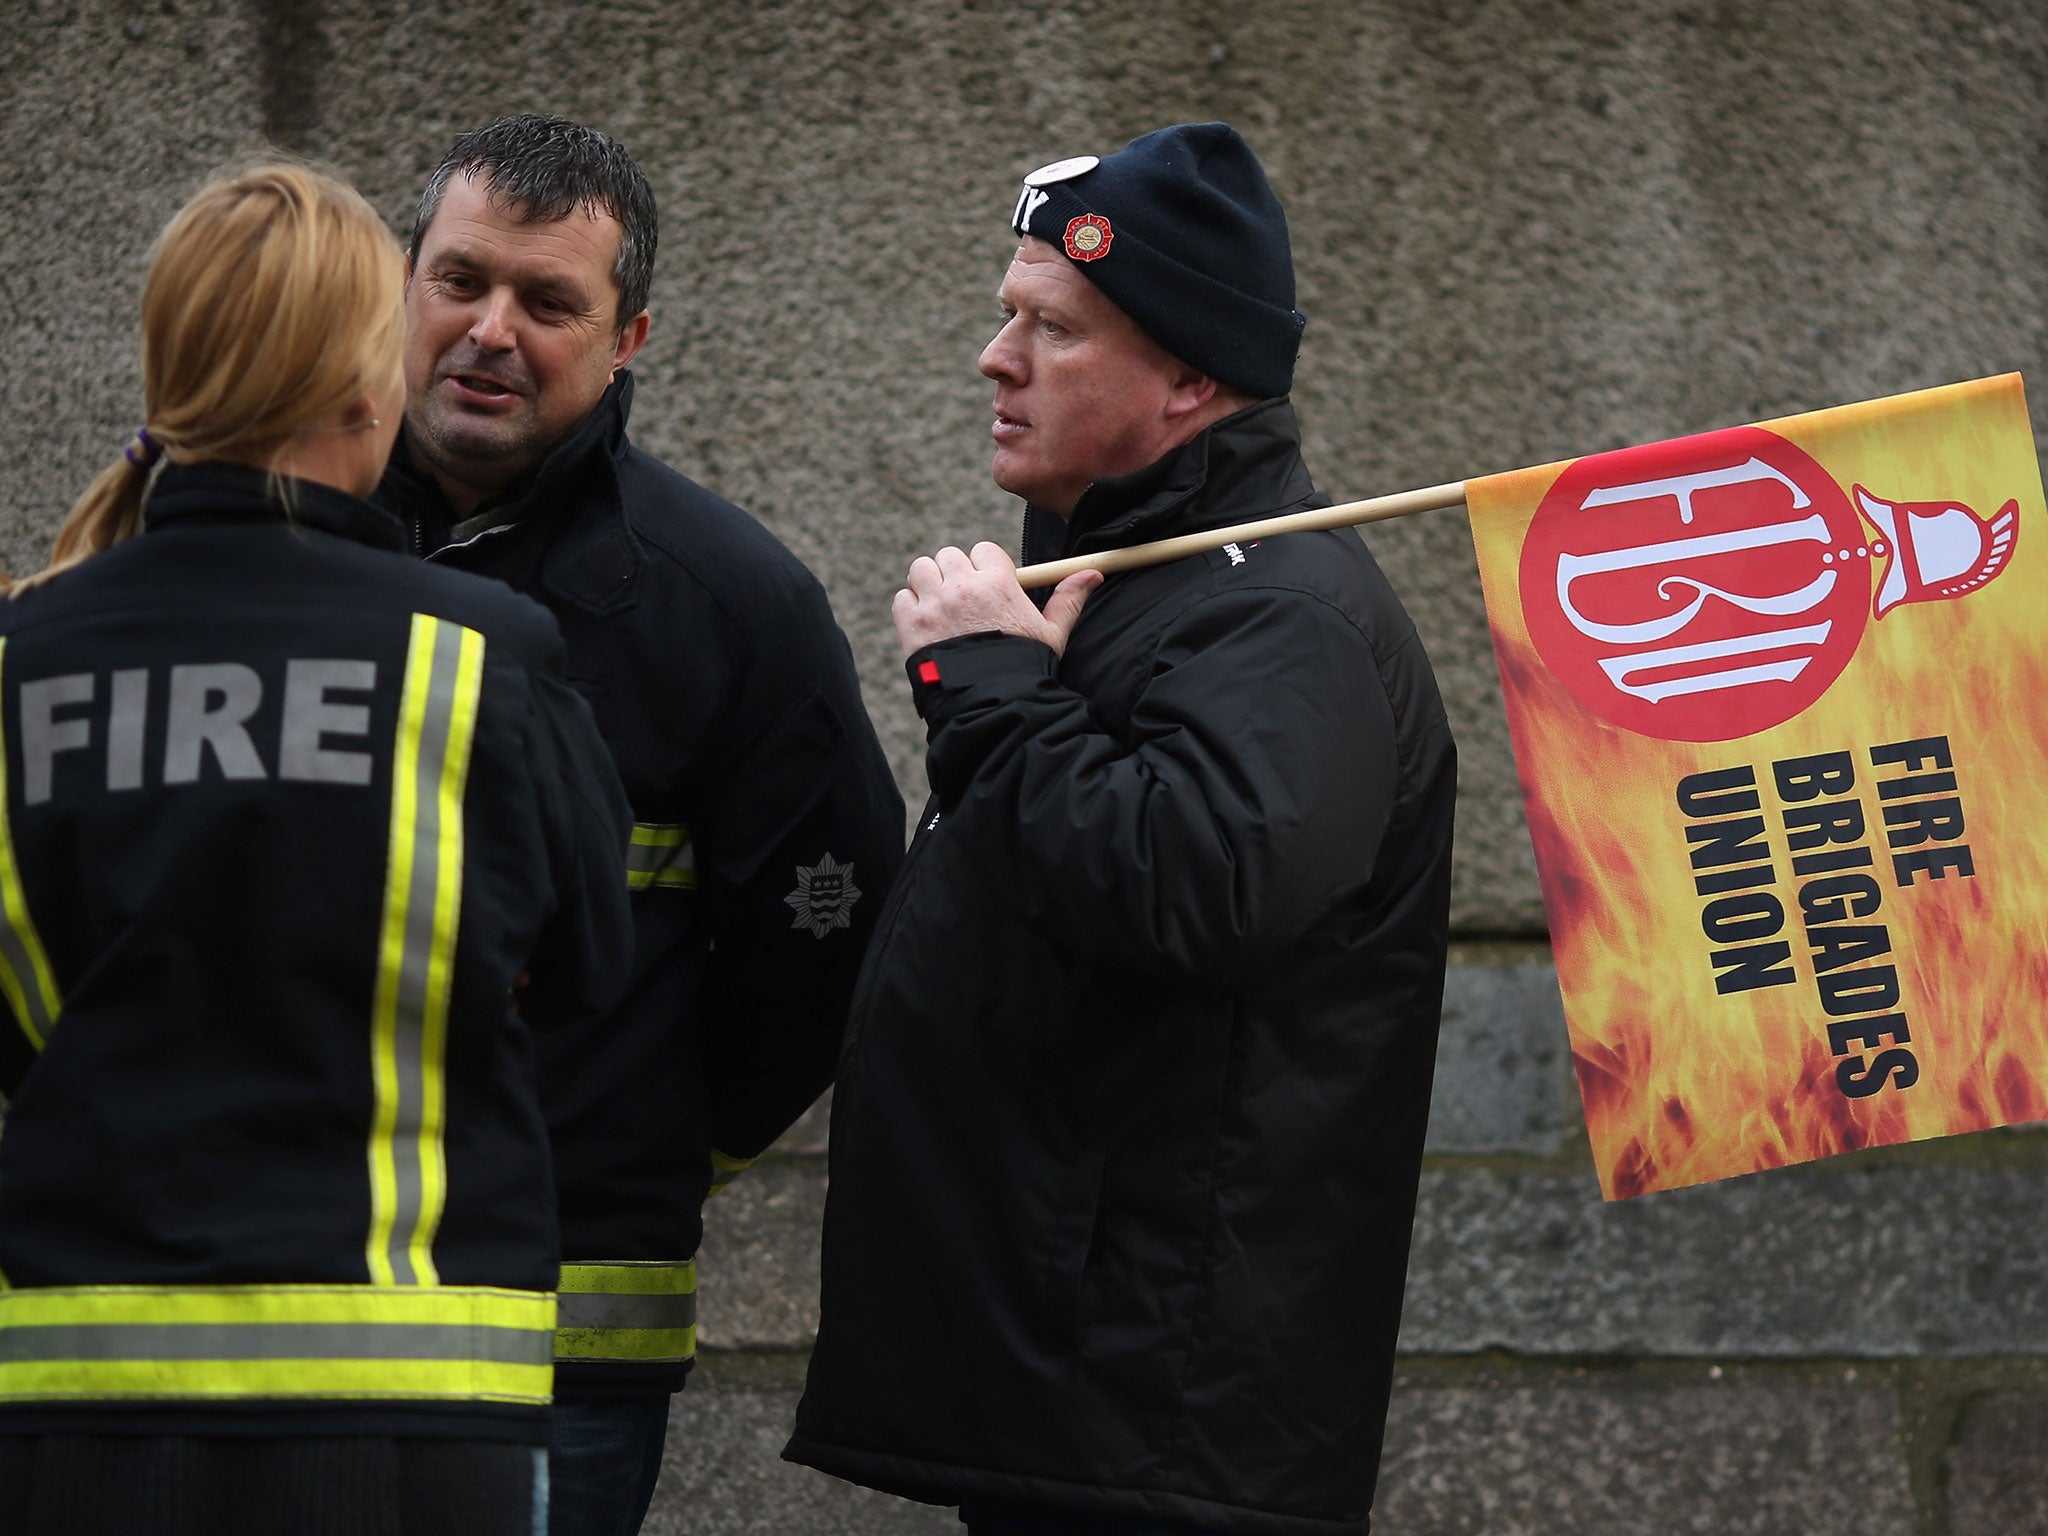 Members of the Fire Brigades Union (FBU) have gone on strike